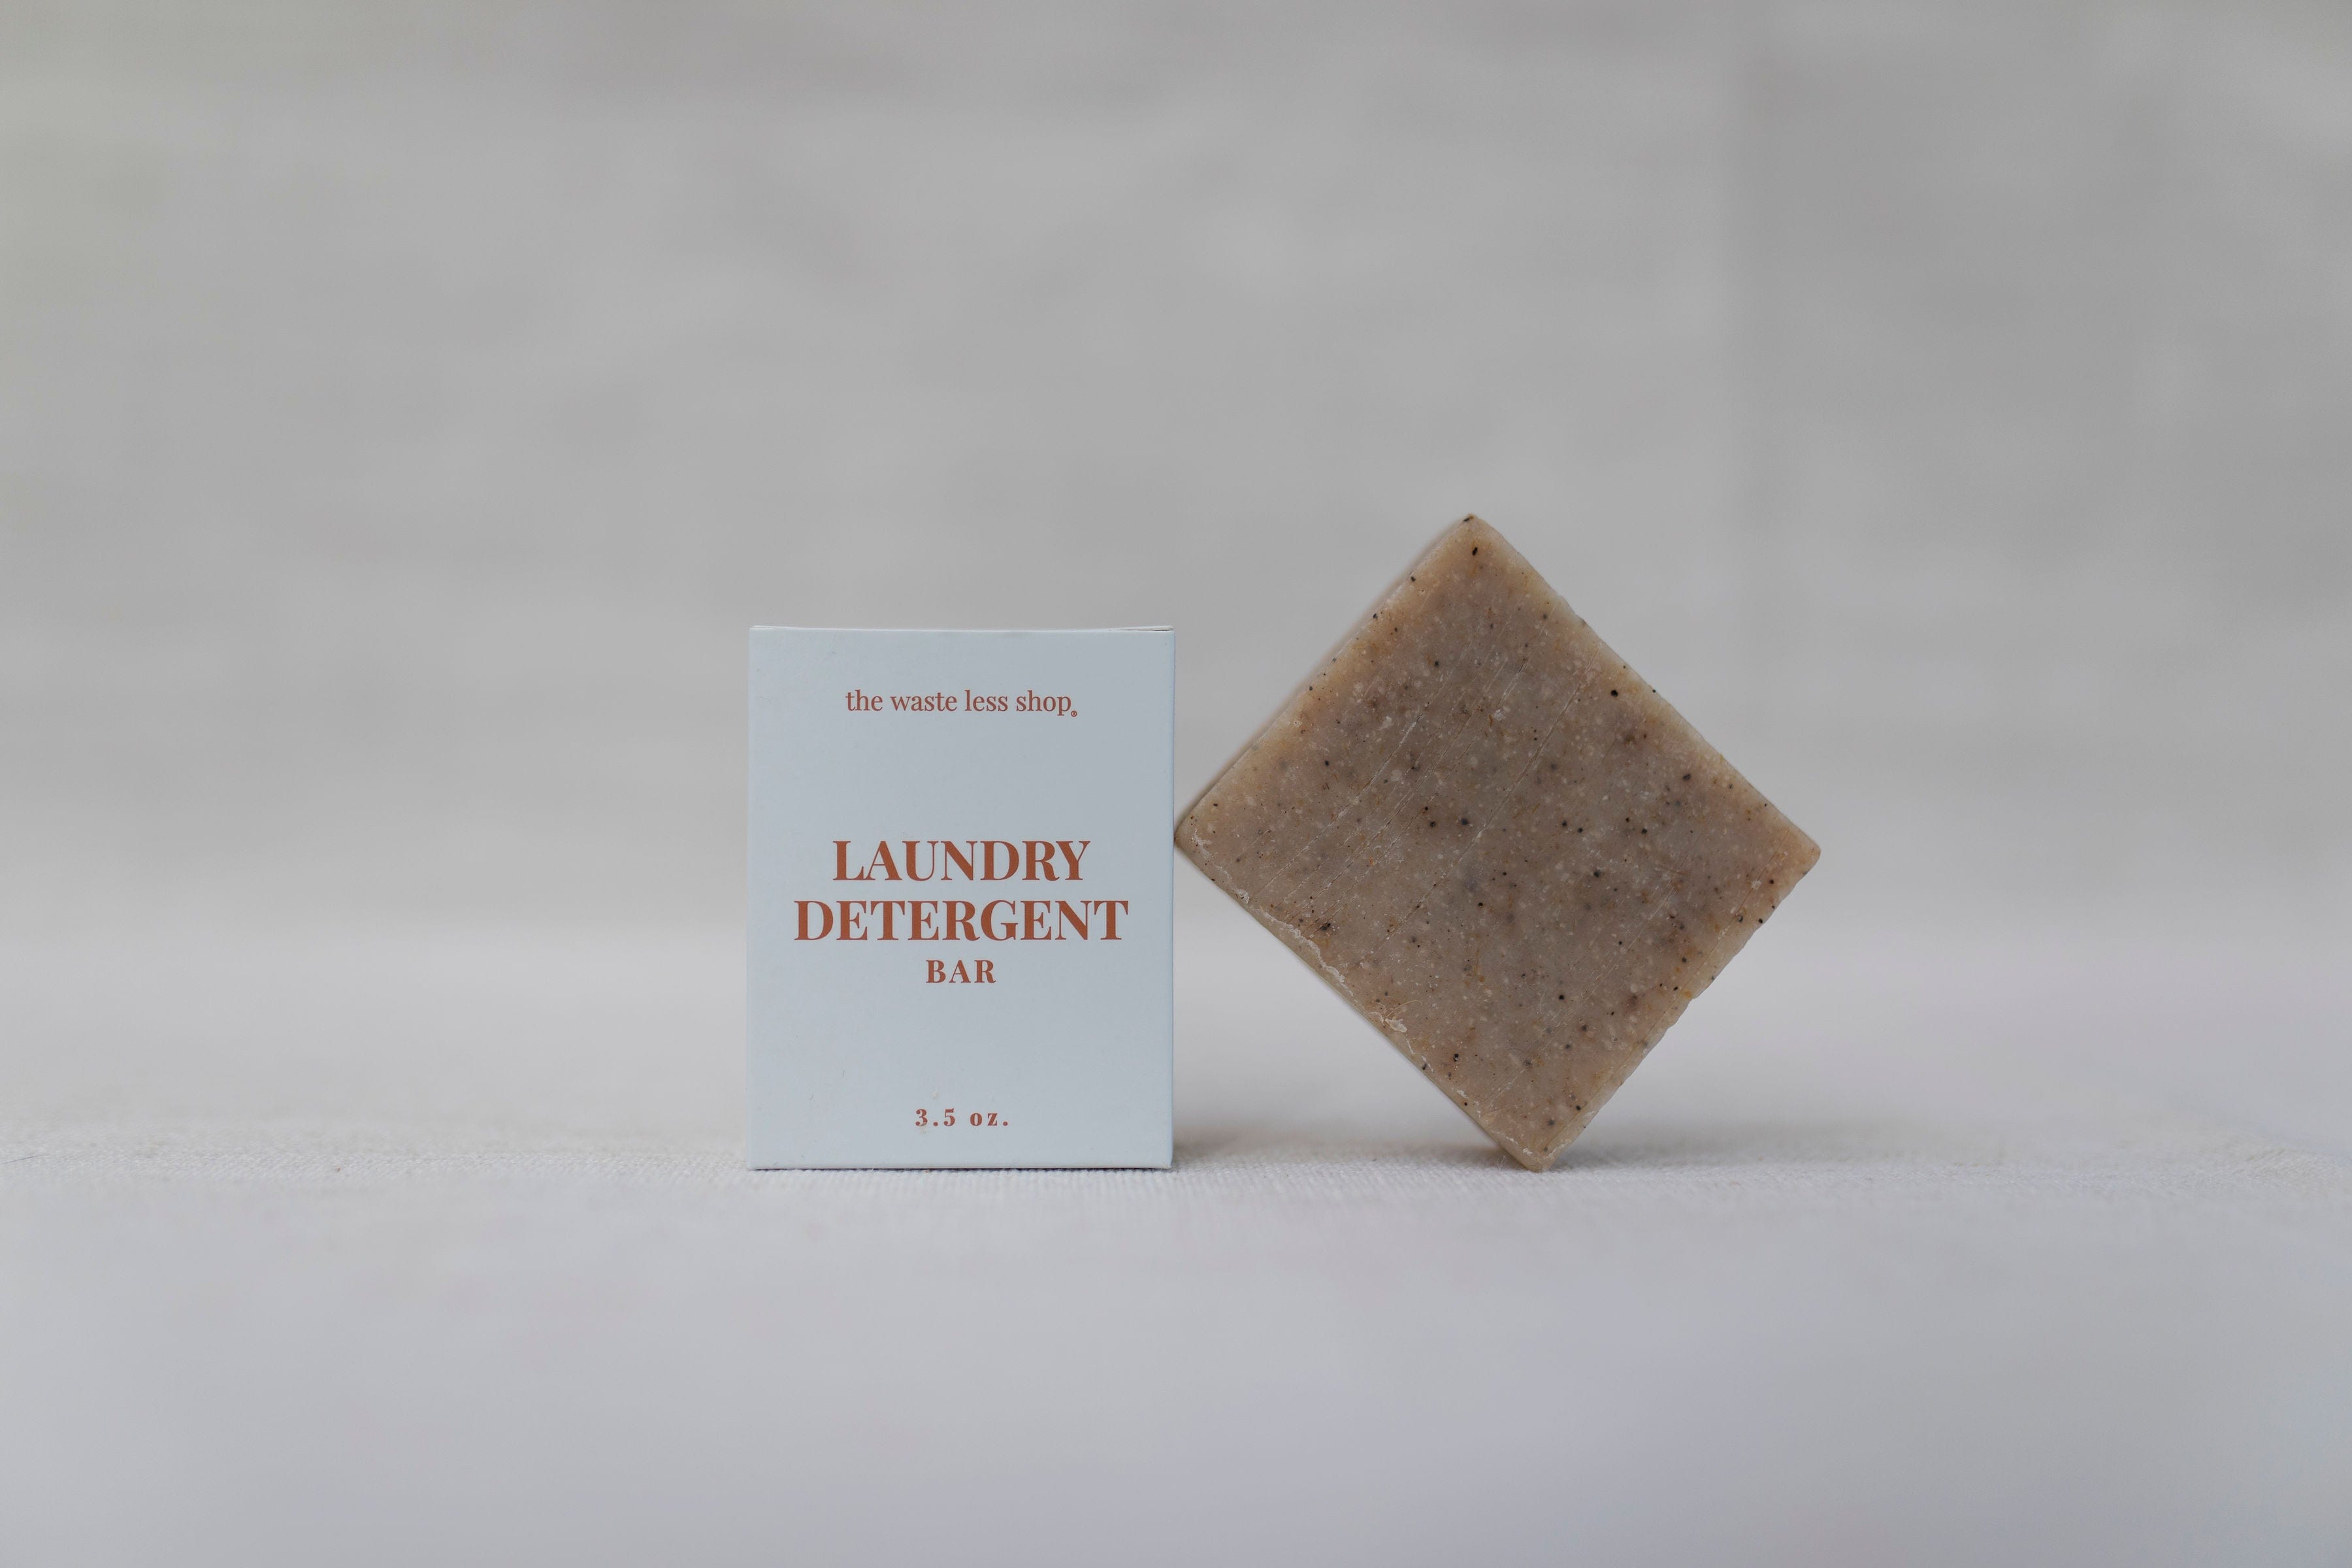 The Waste Less Shop Laundry Detergent Bar